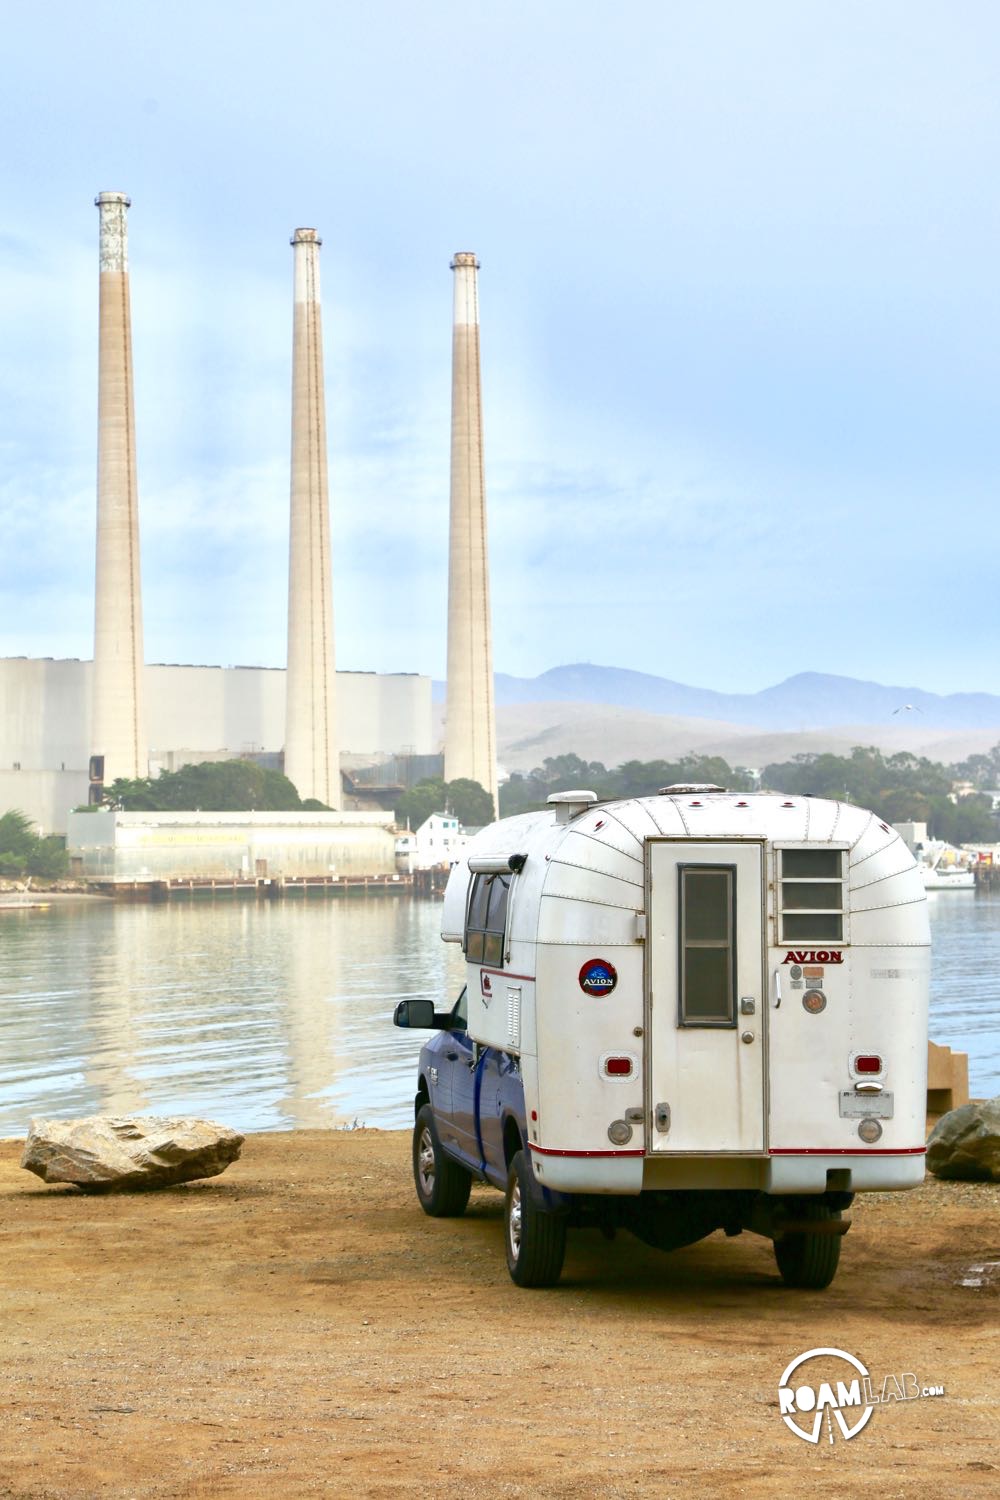 Looking at the Morro Bay Power Plant in our Avion Ultra truck camper.